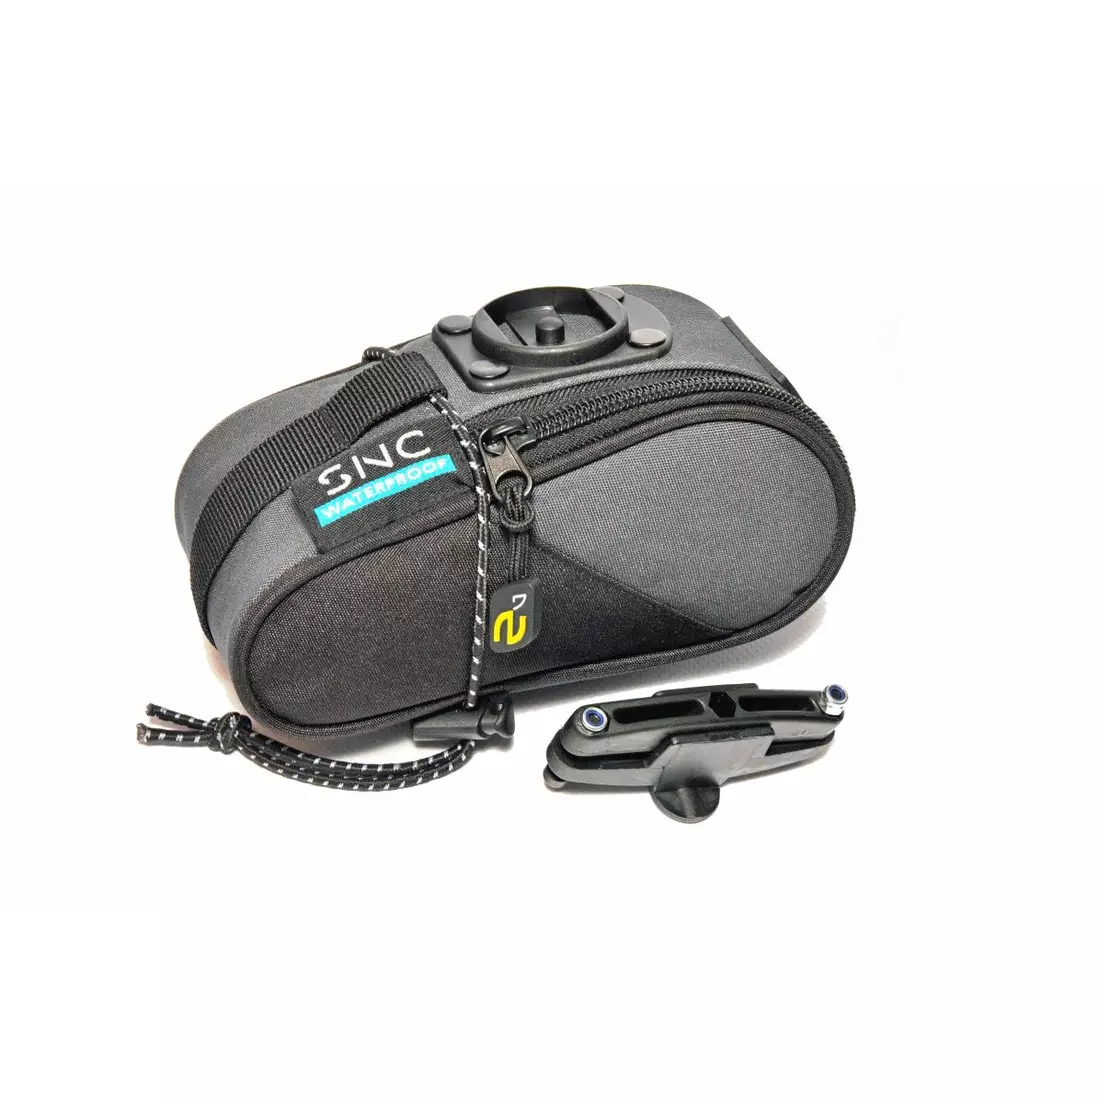 SPORT ARSENAL 516 SNC Competition saddle bag + self-tightening reflective band